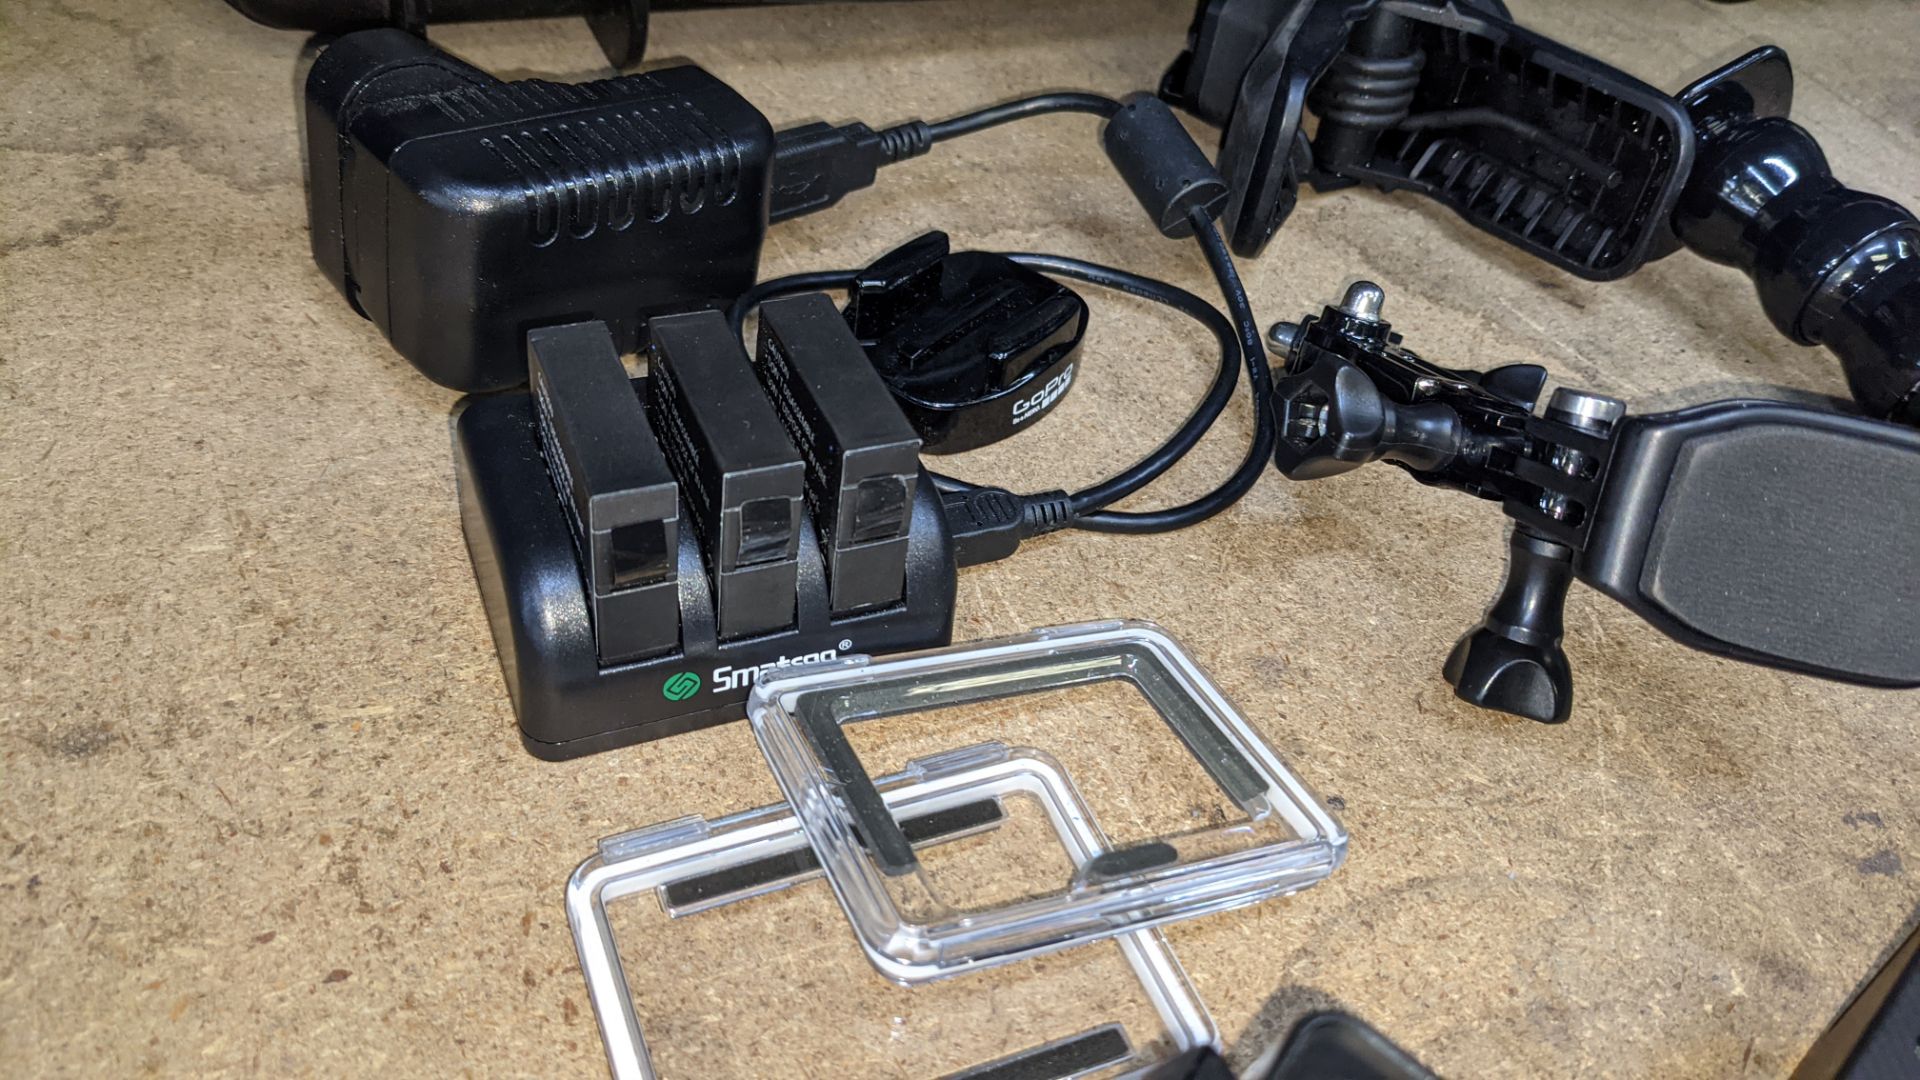 GoPro Hero 4 camera kit comprising GoPro Hero 4 plus wide variety of batteries, chargers, cases & mo - Image 9 of 15